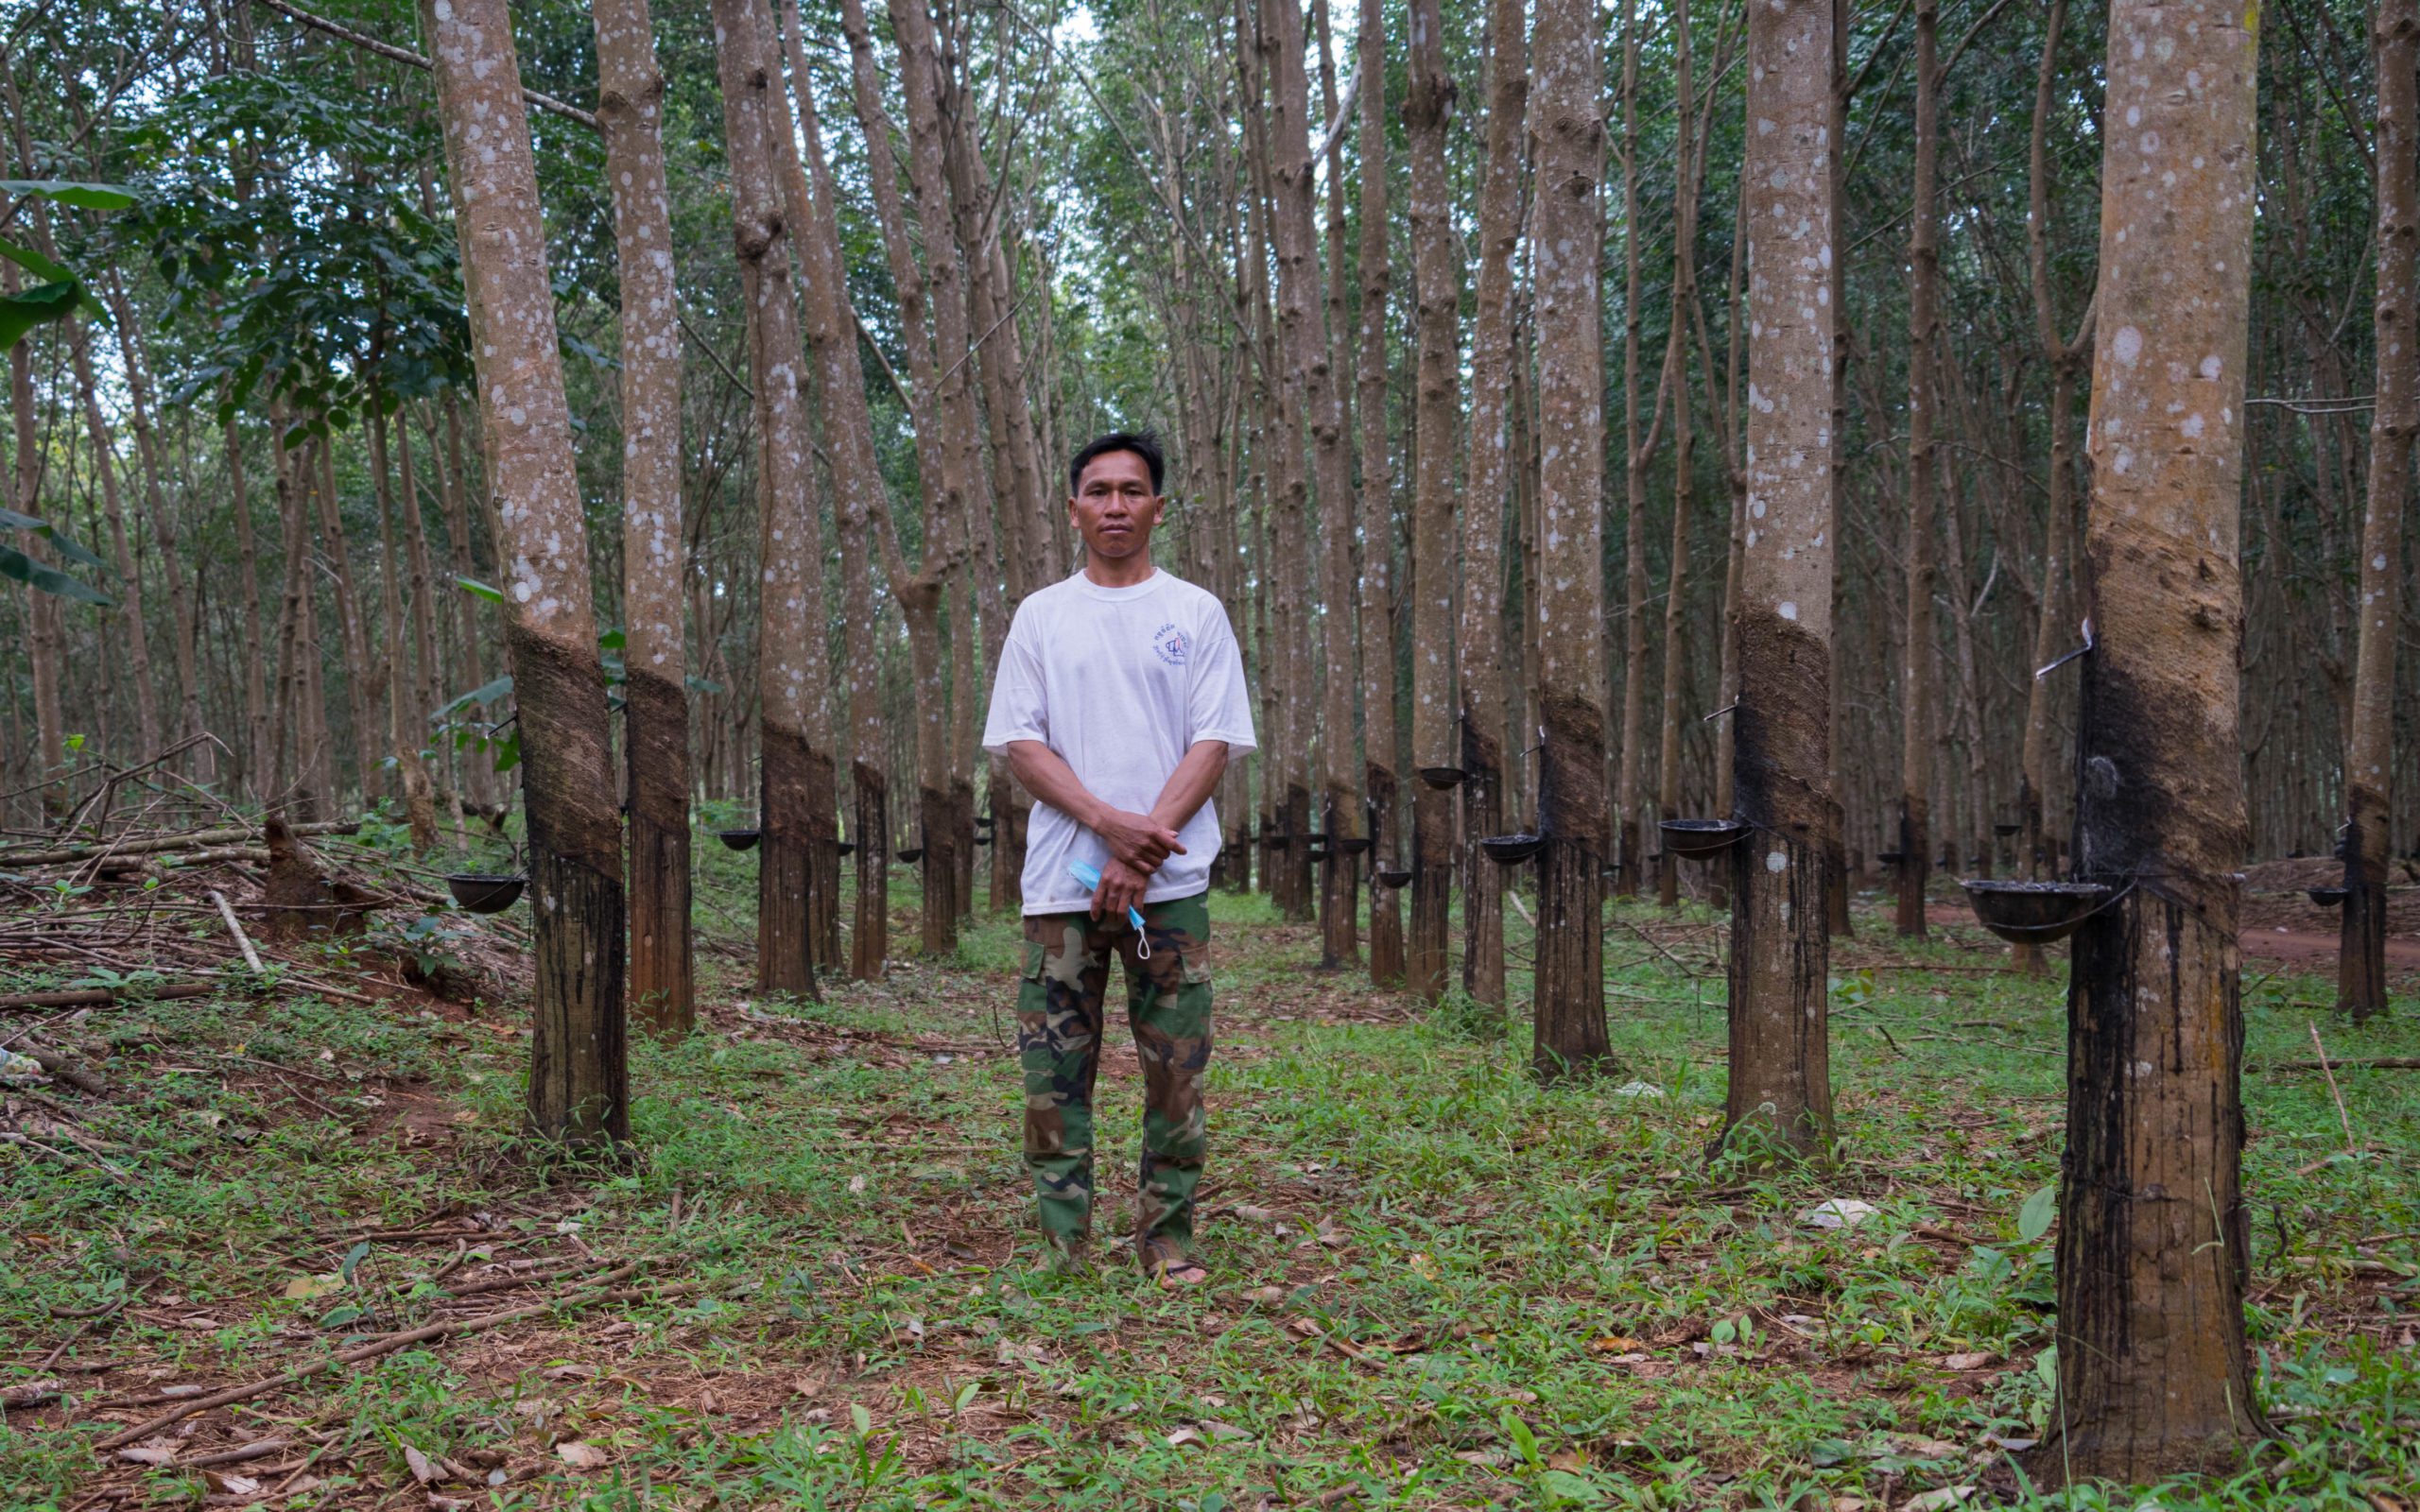 Bunong farmer Khlang Thol, 43, stands amid rubber trees on land where he used to grow rice for his entire family, in Mondulkiri in November 2021. (Francois Camps/VOD)